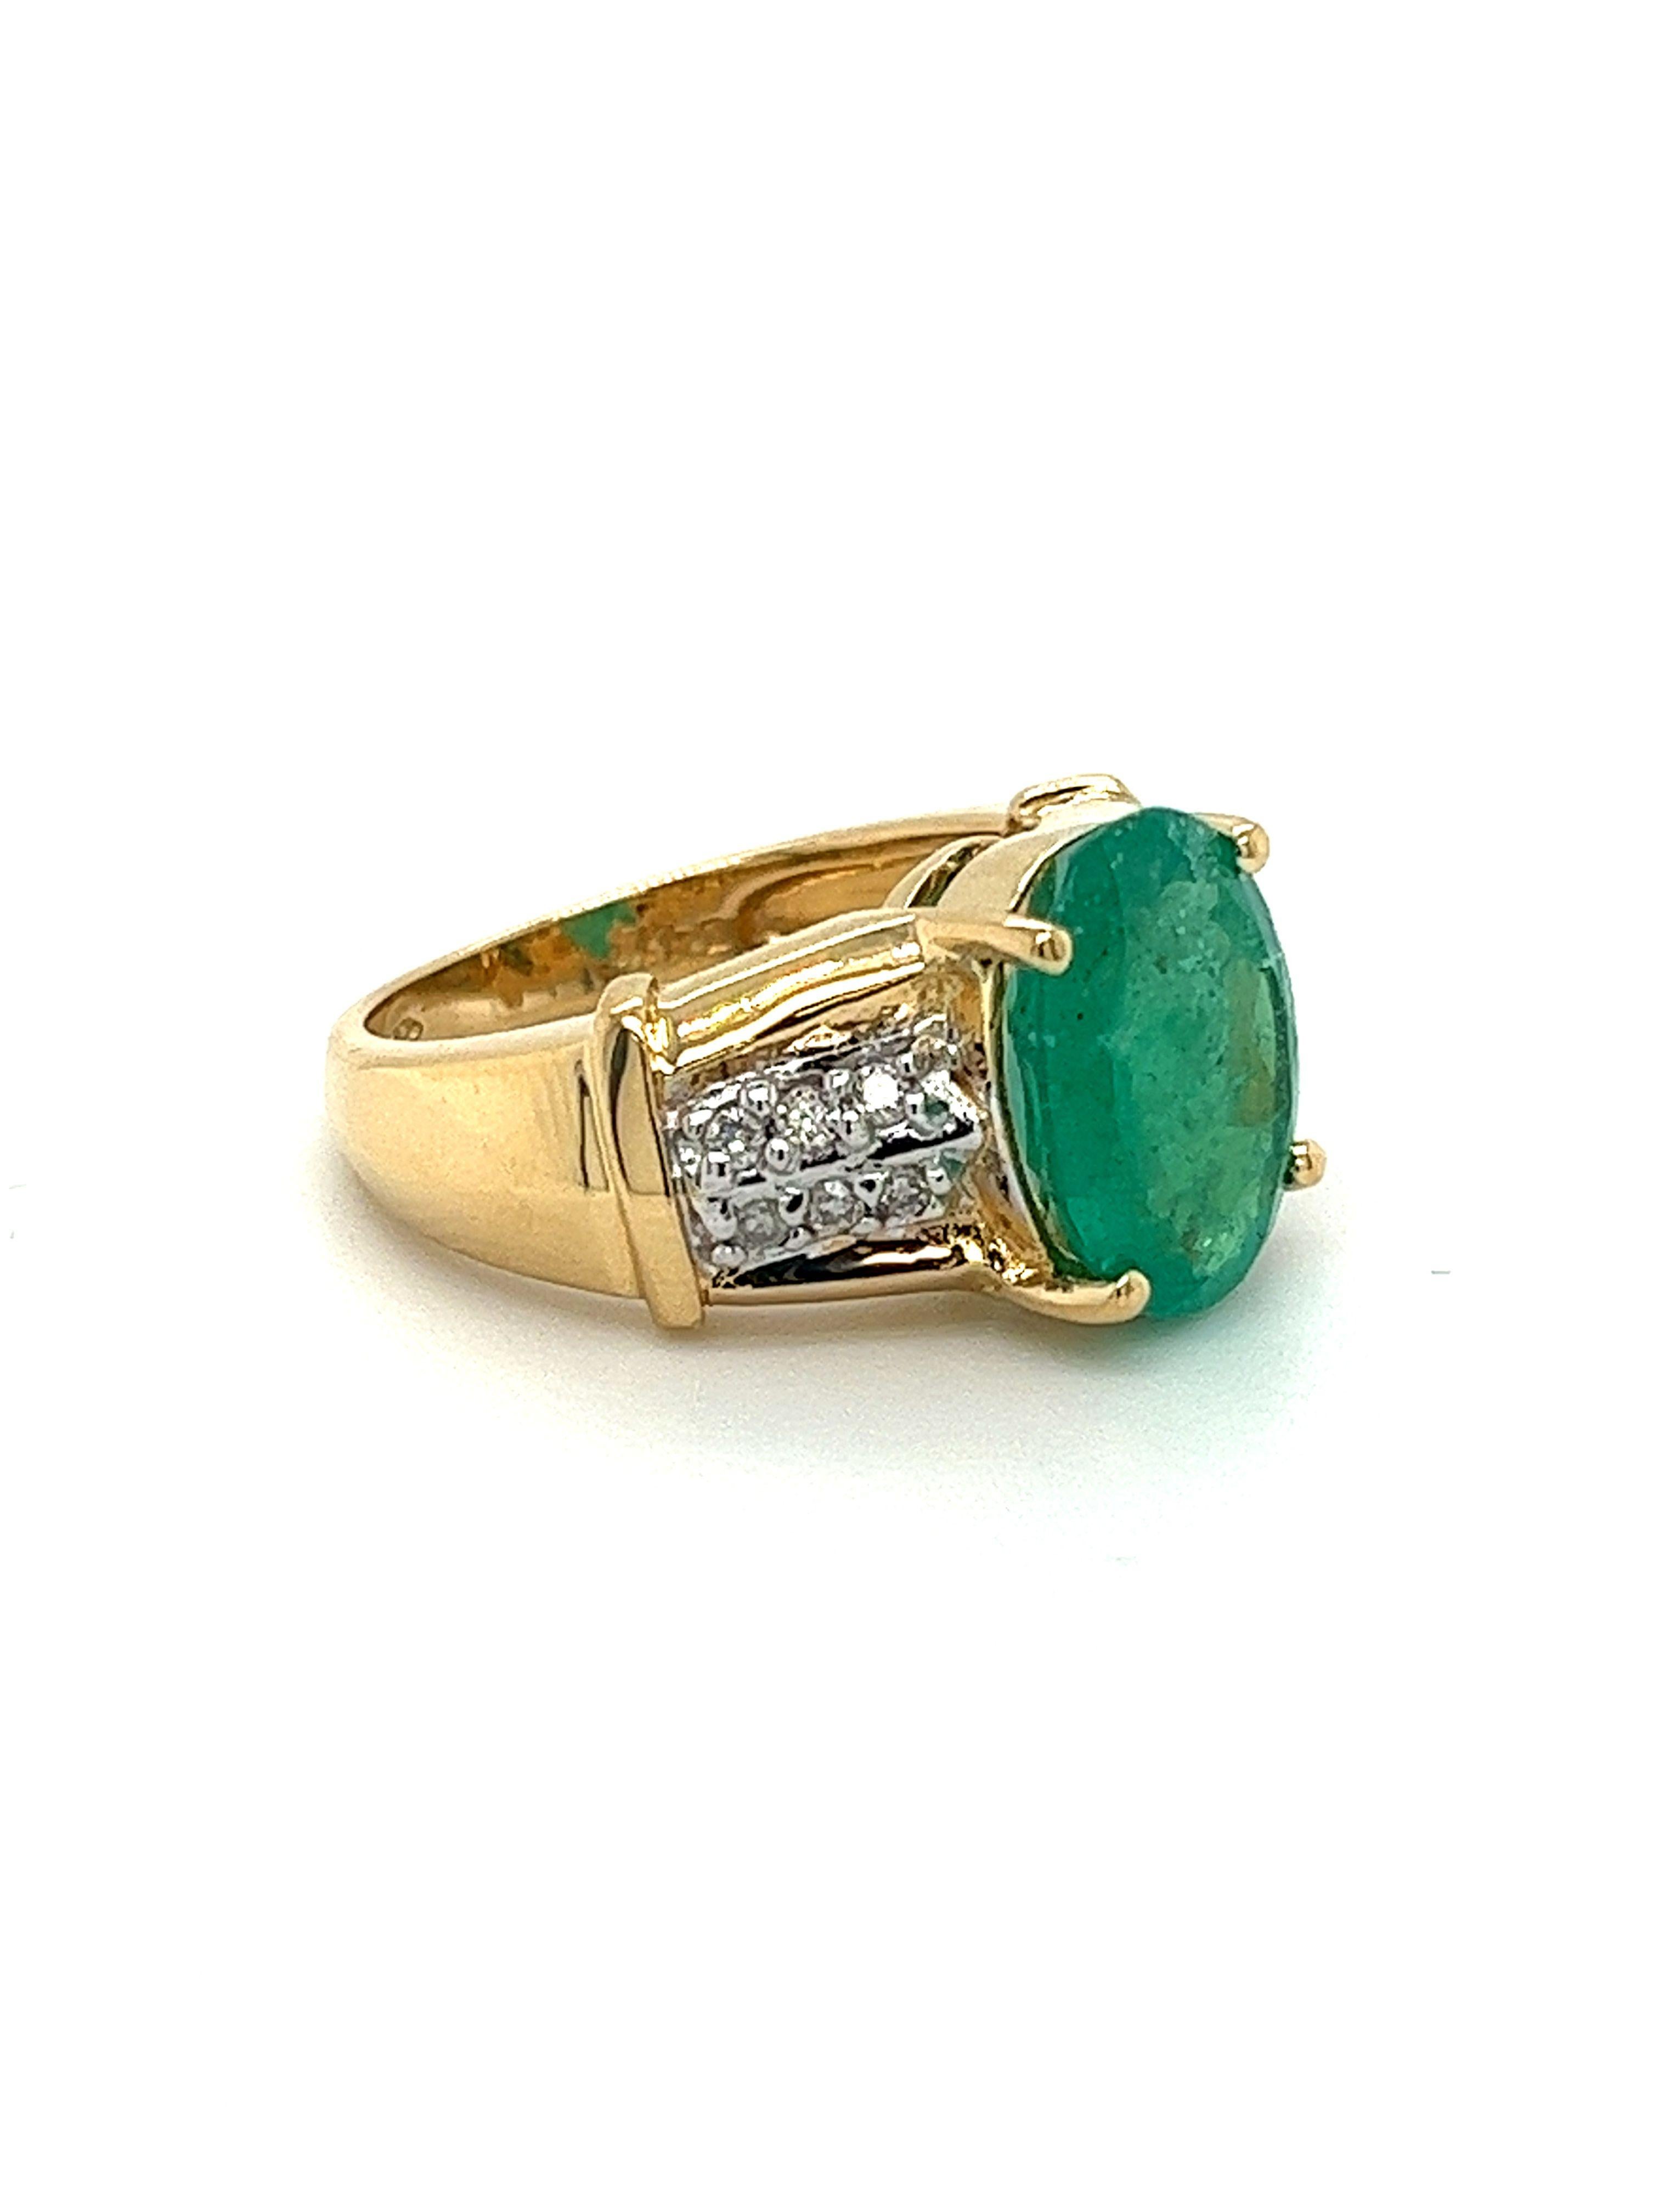 Natural Emerald and Diamond Ring, featuring a 4.14 Carat Oval Cut Emerald Center Stone with Round Cut Diamond Side Stones. This stunning ring comes in Ring Size 7 and is adjustable to sizes 5-10.

This ring mounts a 4 carat emerald with a large